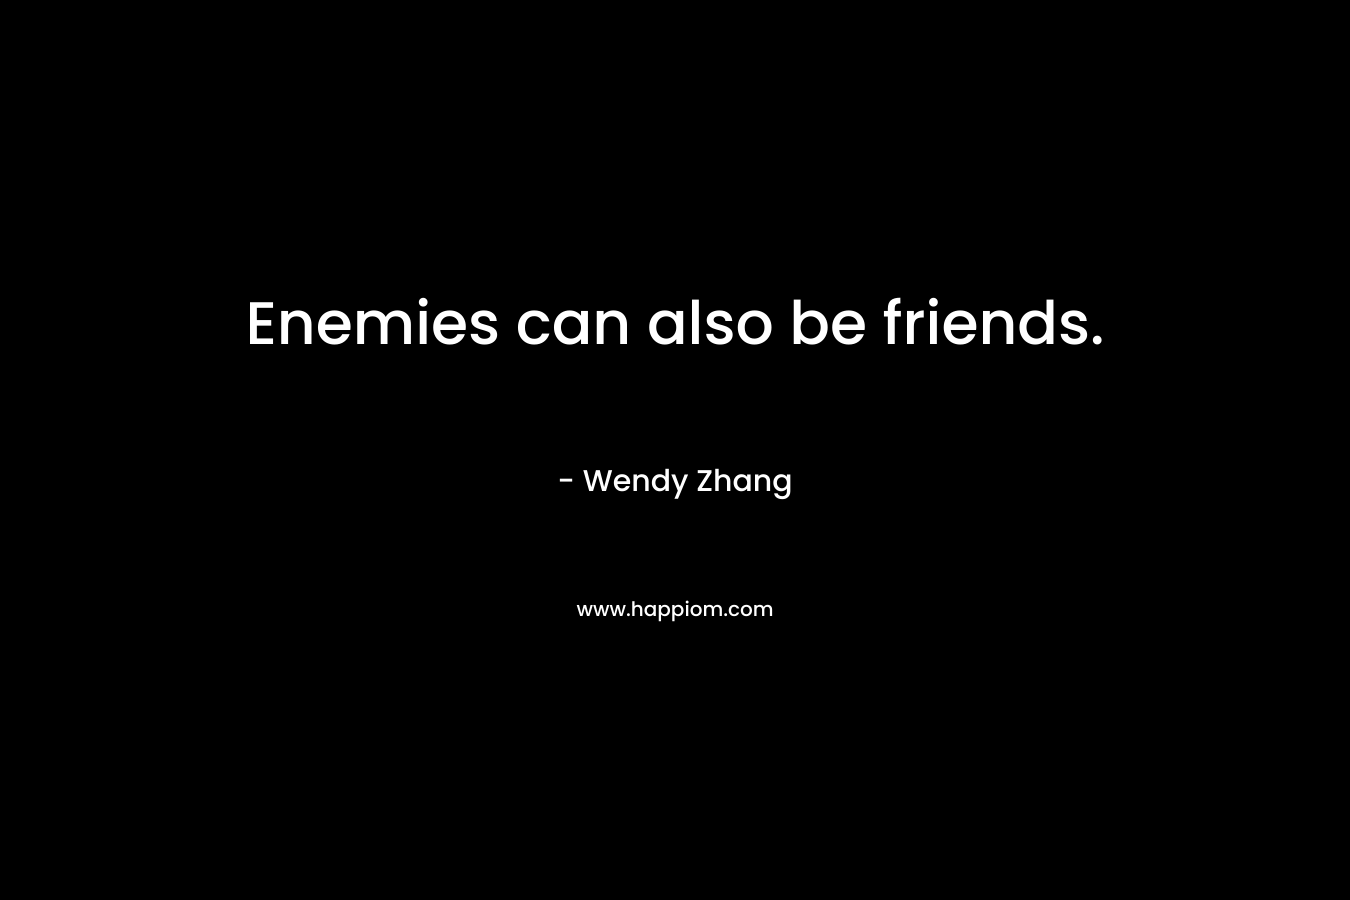 Enemies can also be friends.